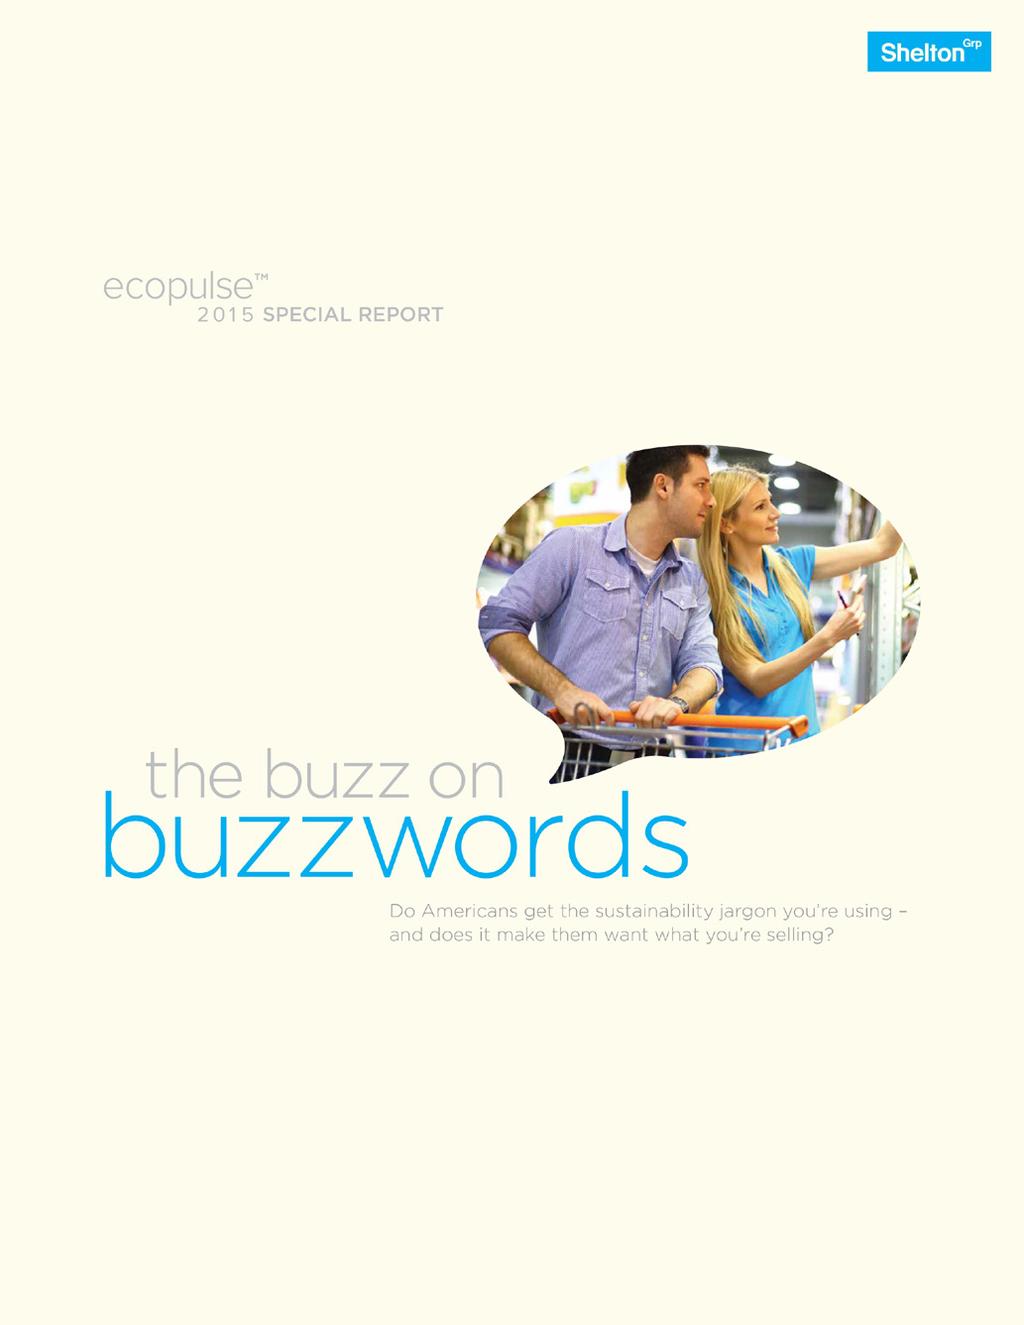 download our companion report, the buzz on buzzwords methodology Data referenced in this report was pulled from our proprietary Eco Pulse 2015 study, Google Trends data (taken from all U.S.